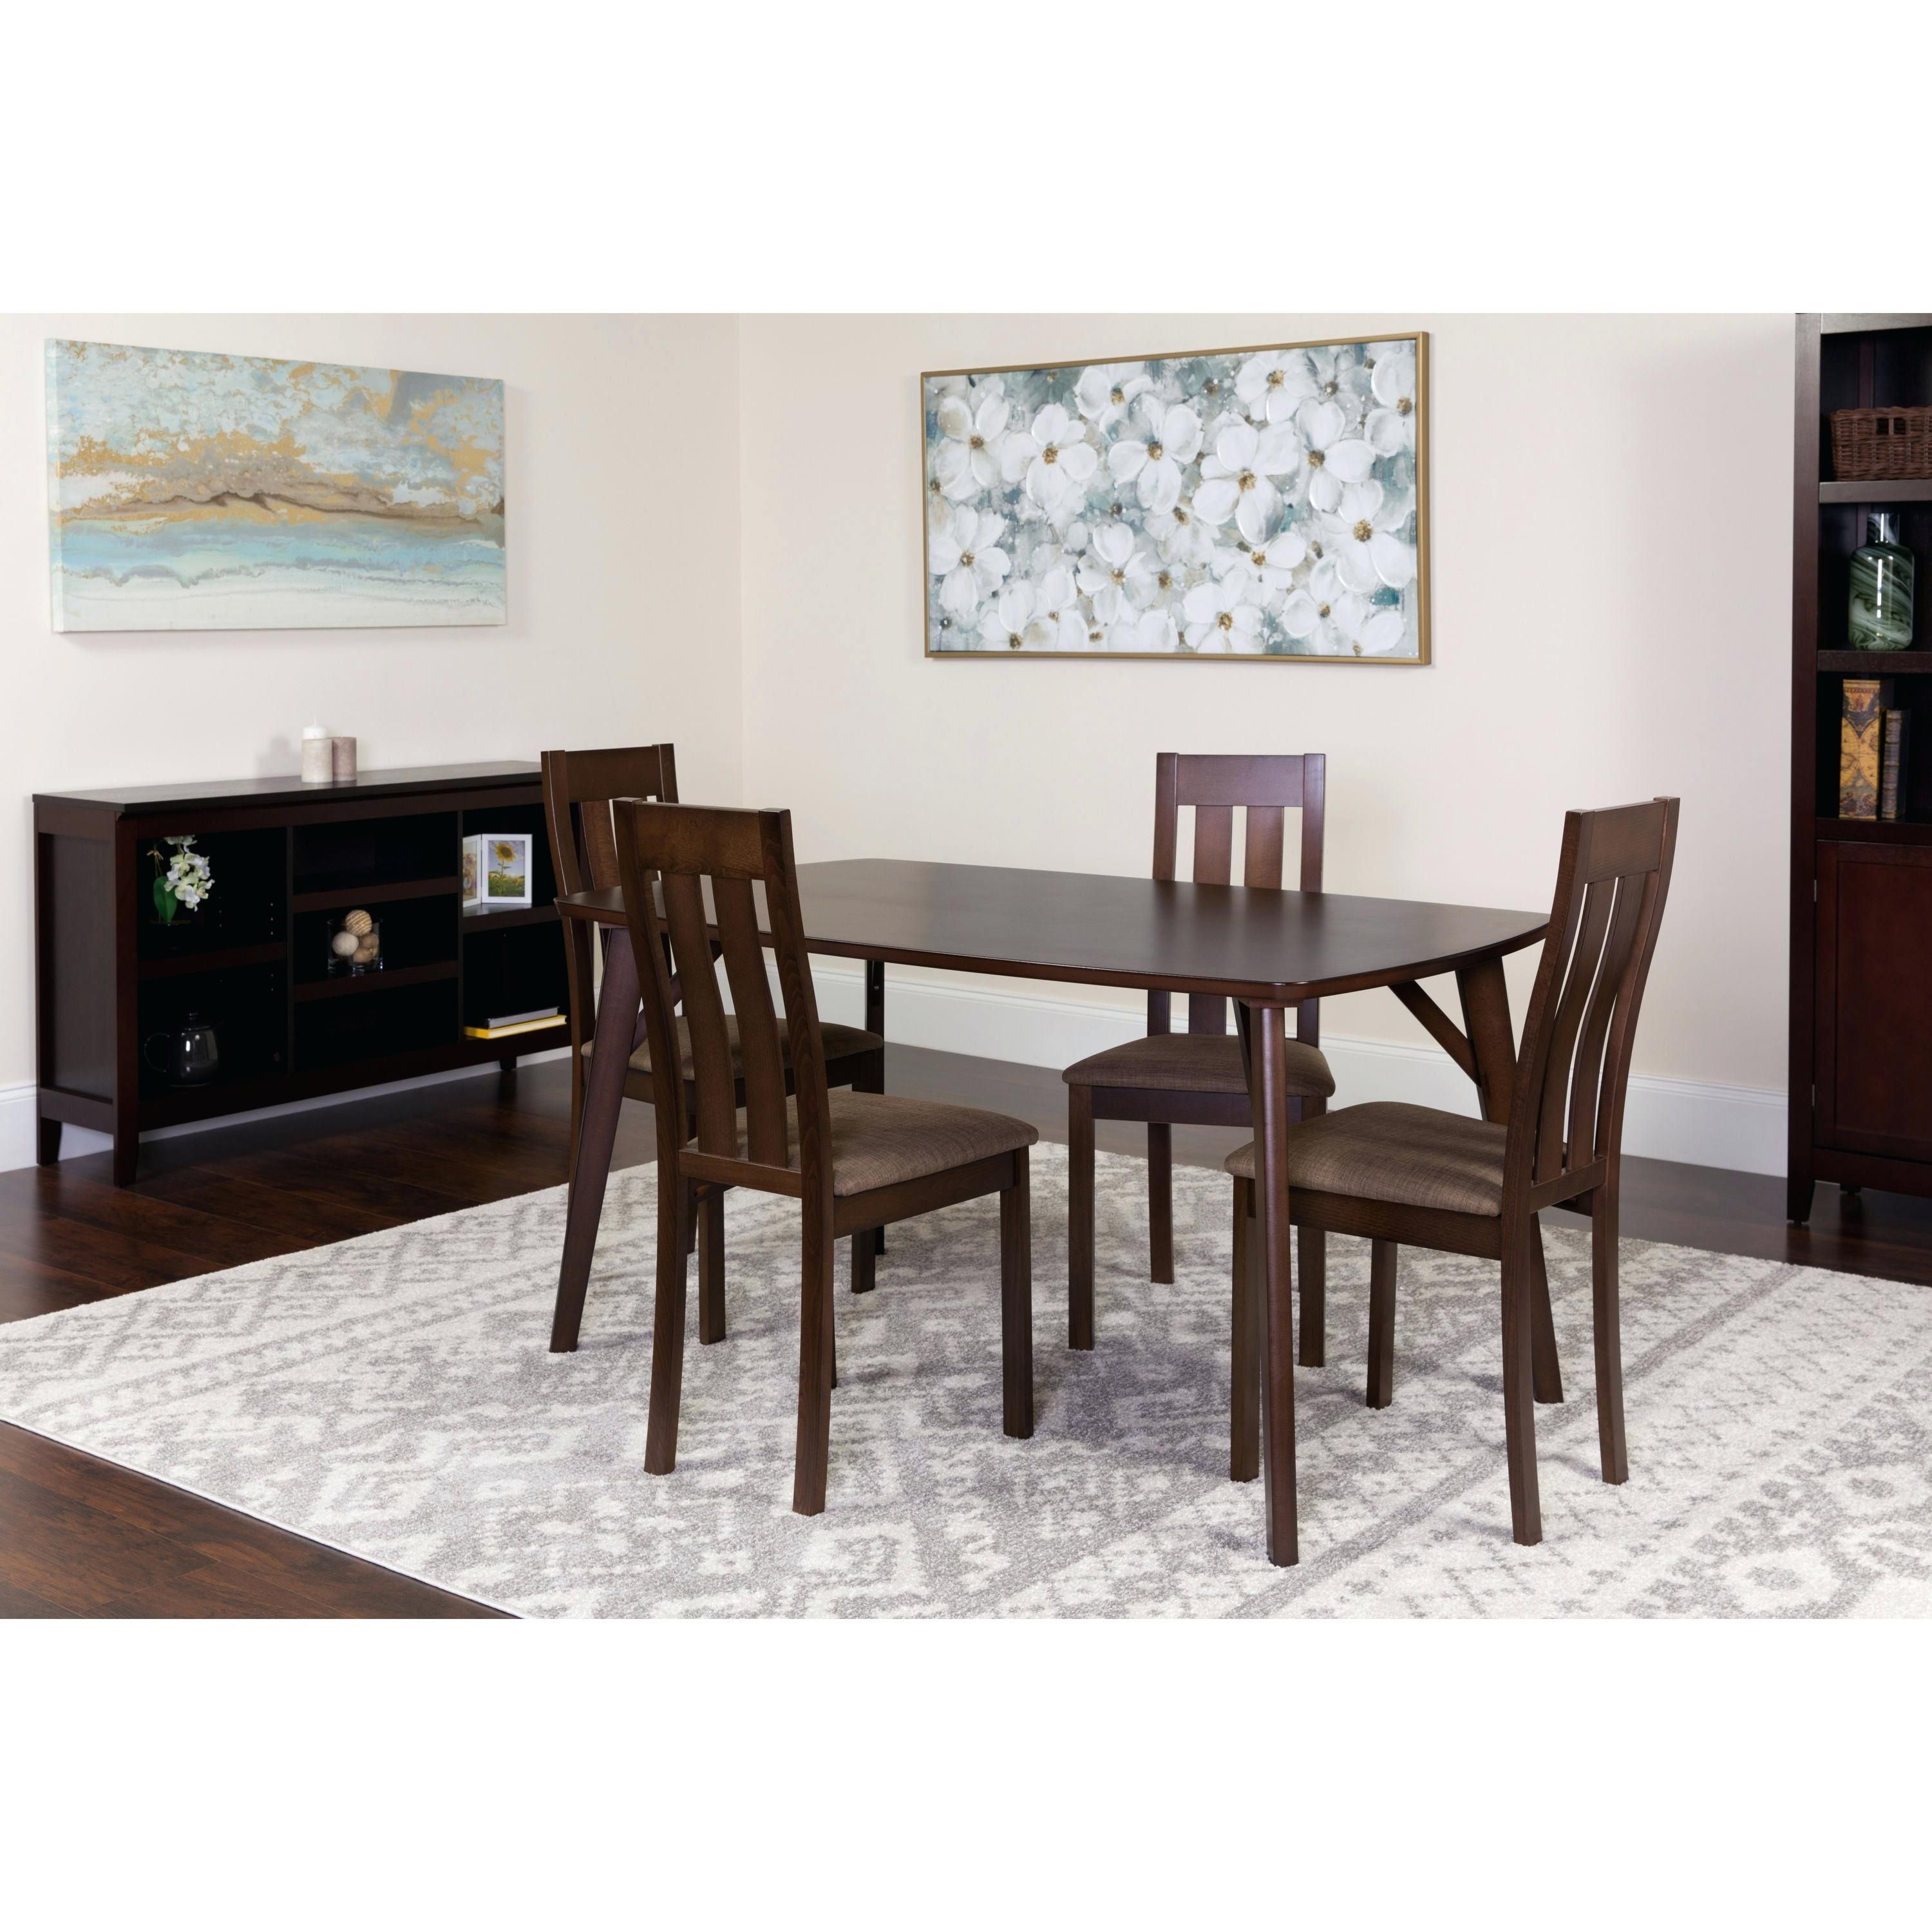 5 Piece Espresso Dining Set Our 5 Piece Espresso Wood Dining Table Within Most Up To Date Caira Black Round Dining Tables (View 17 of 20)